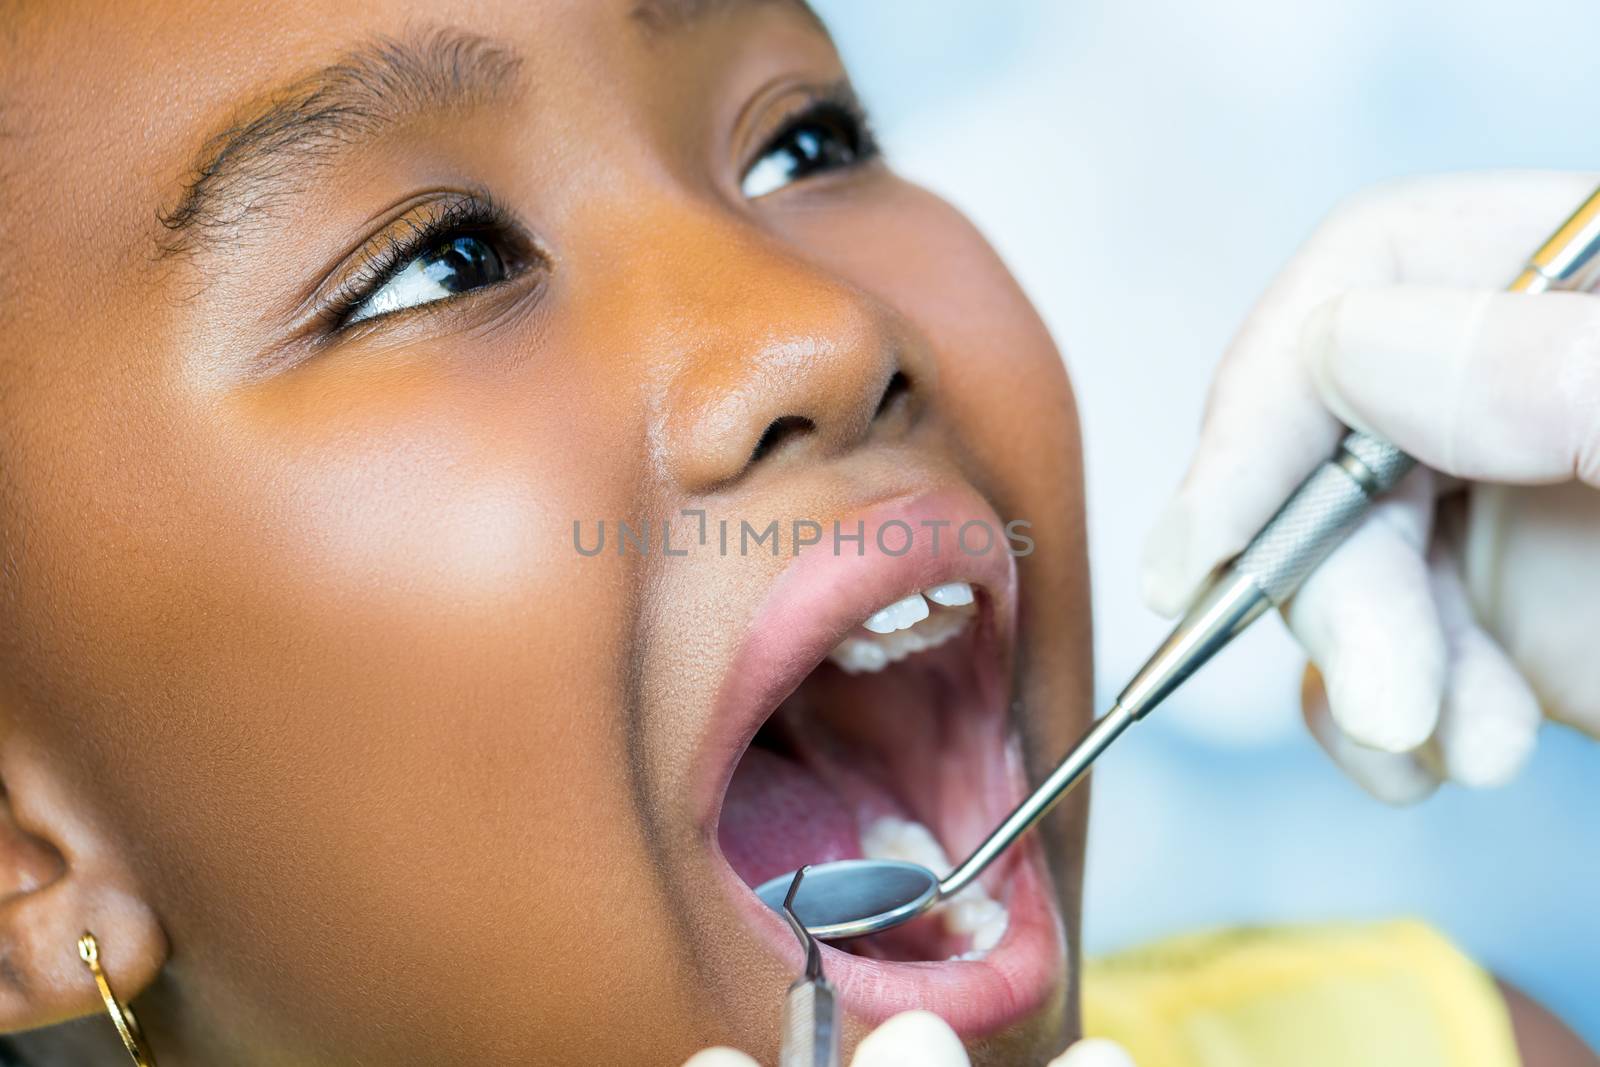 African youngster at dental checkup. by karelnoppe